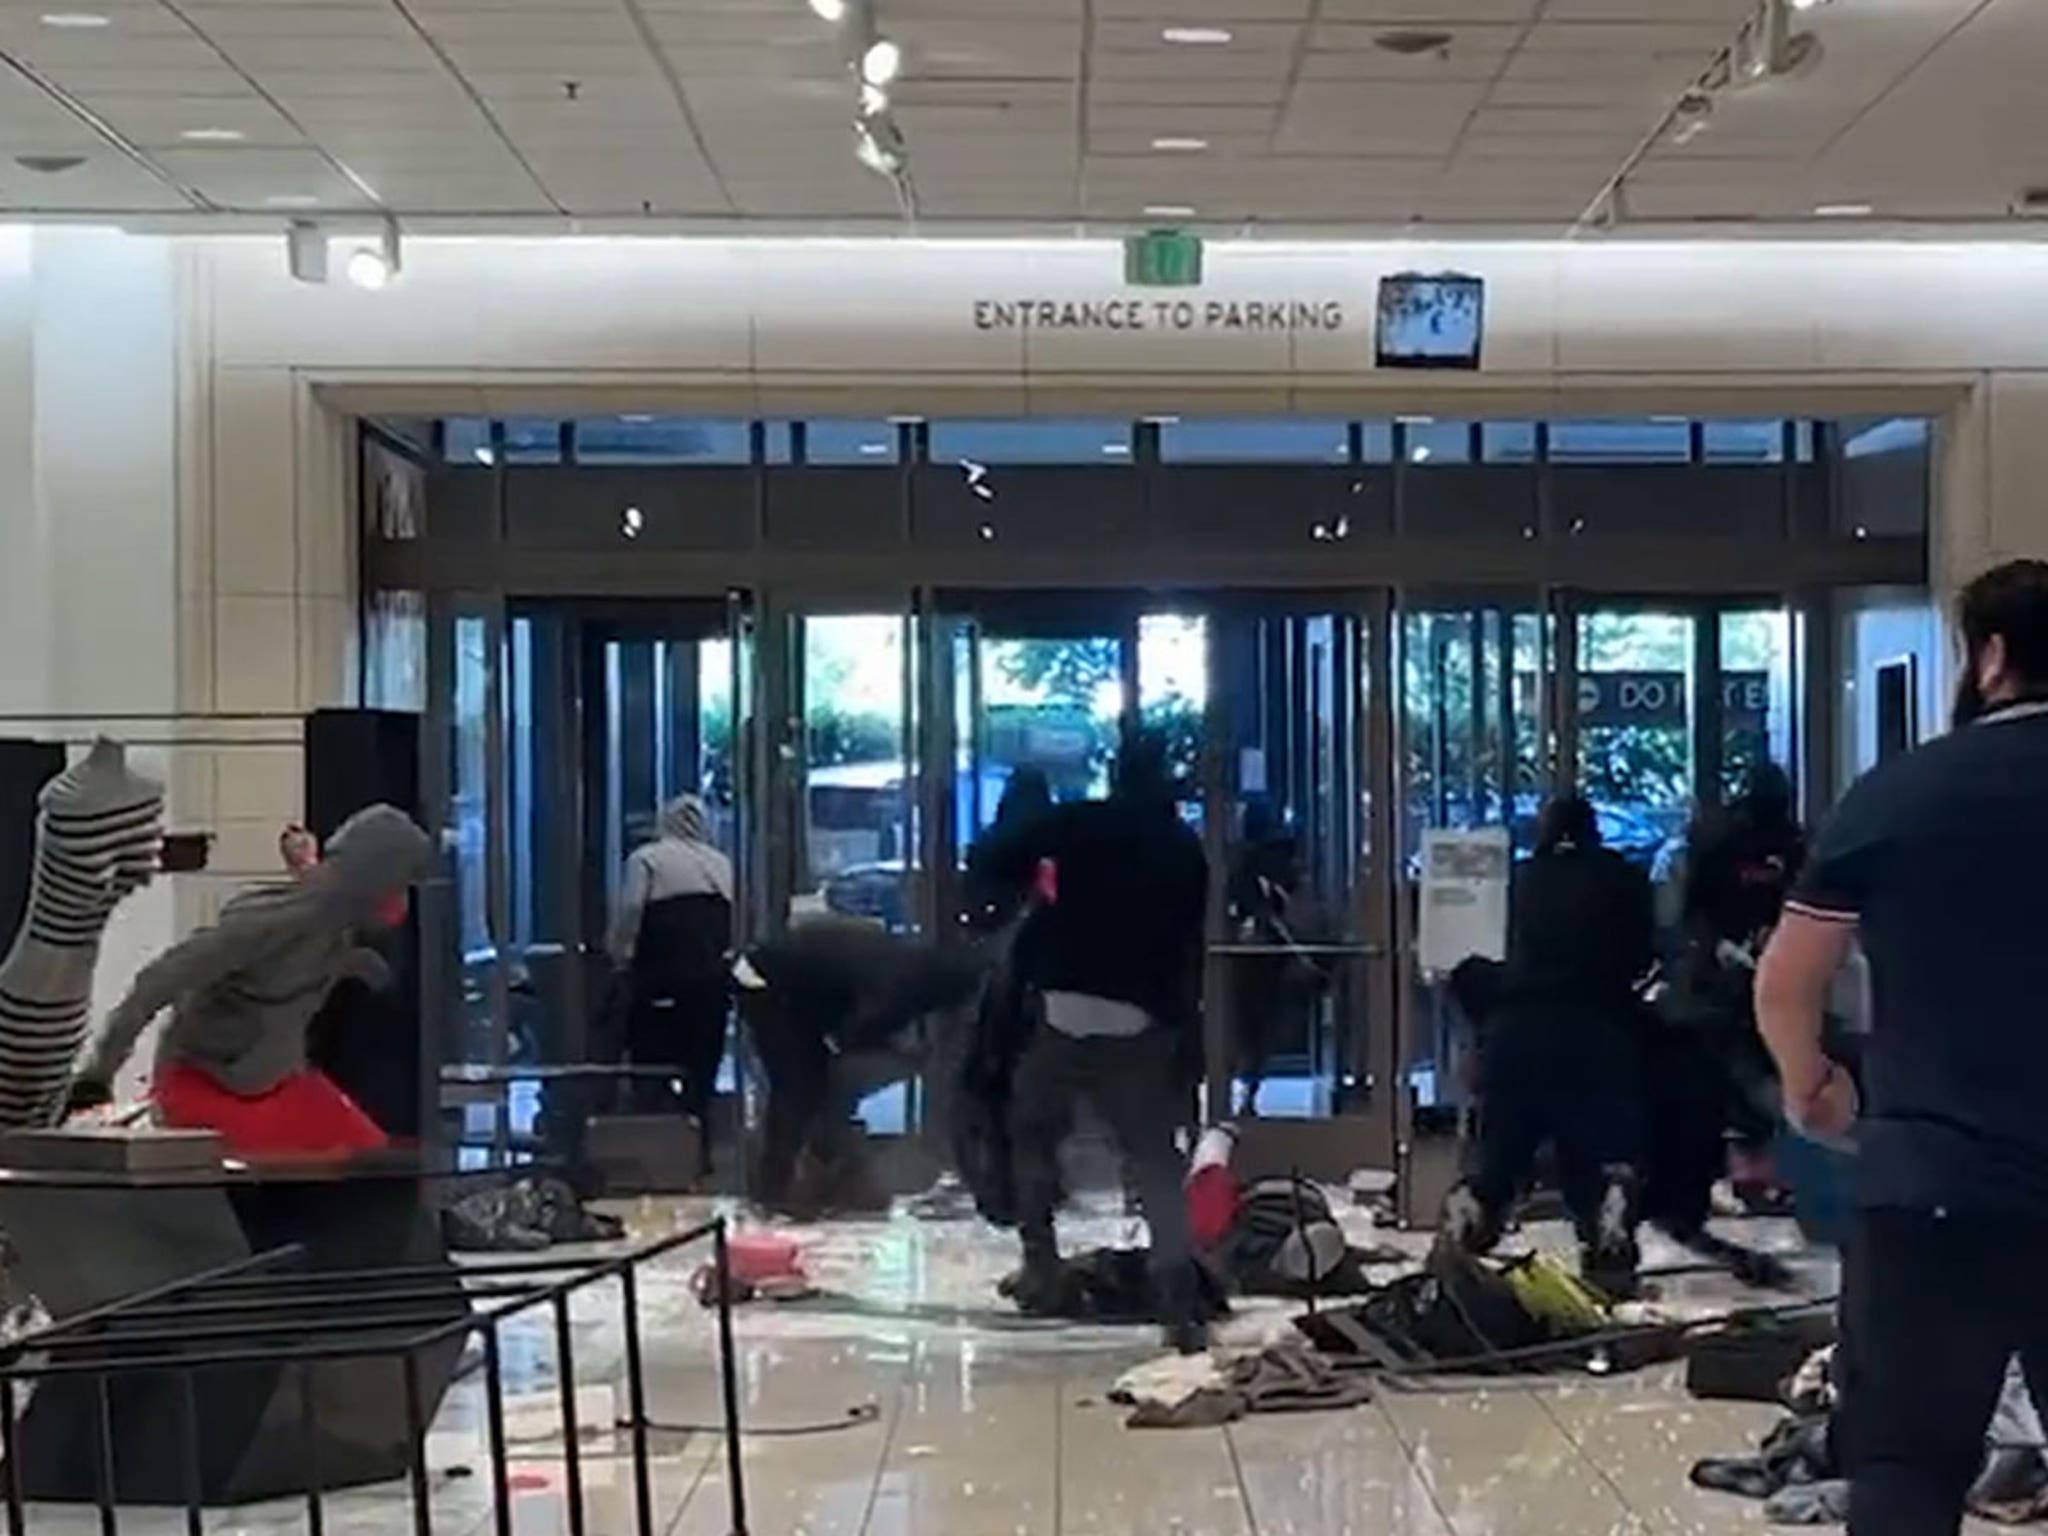 Dozens of People Ransacked Nordstrom in Smash-and-Grab Looting: Police